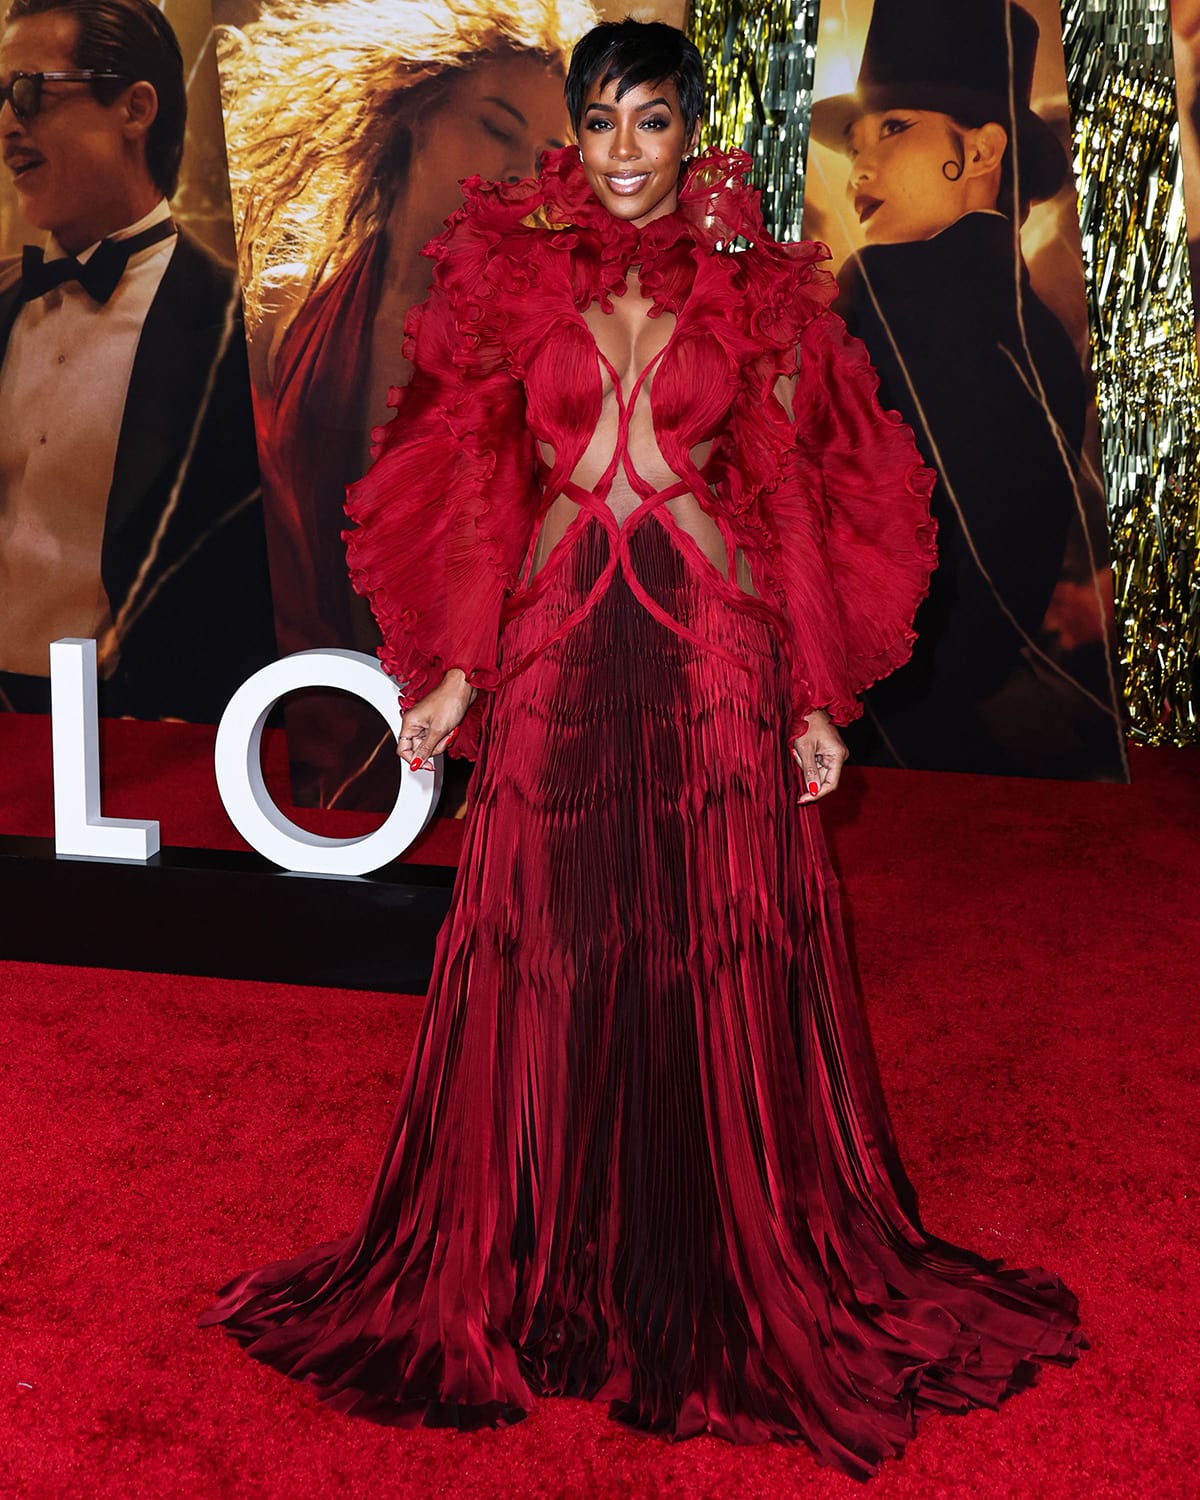 Kelly Rowland flaunts her boobs and abs in a red ruffled cutout gown by Iris Van Herpen